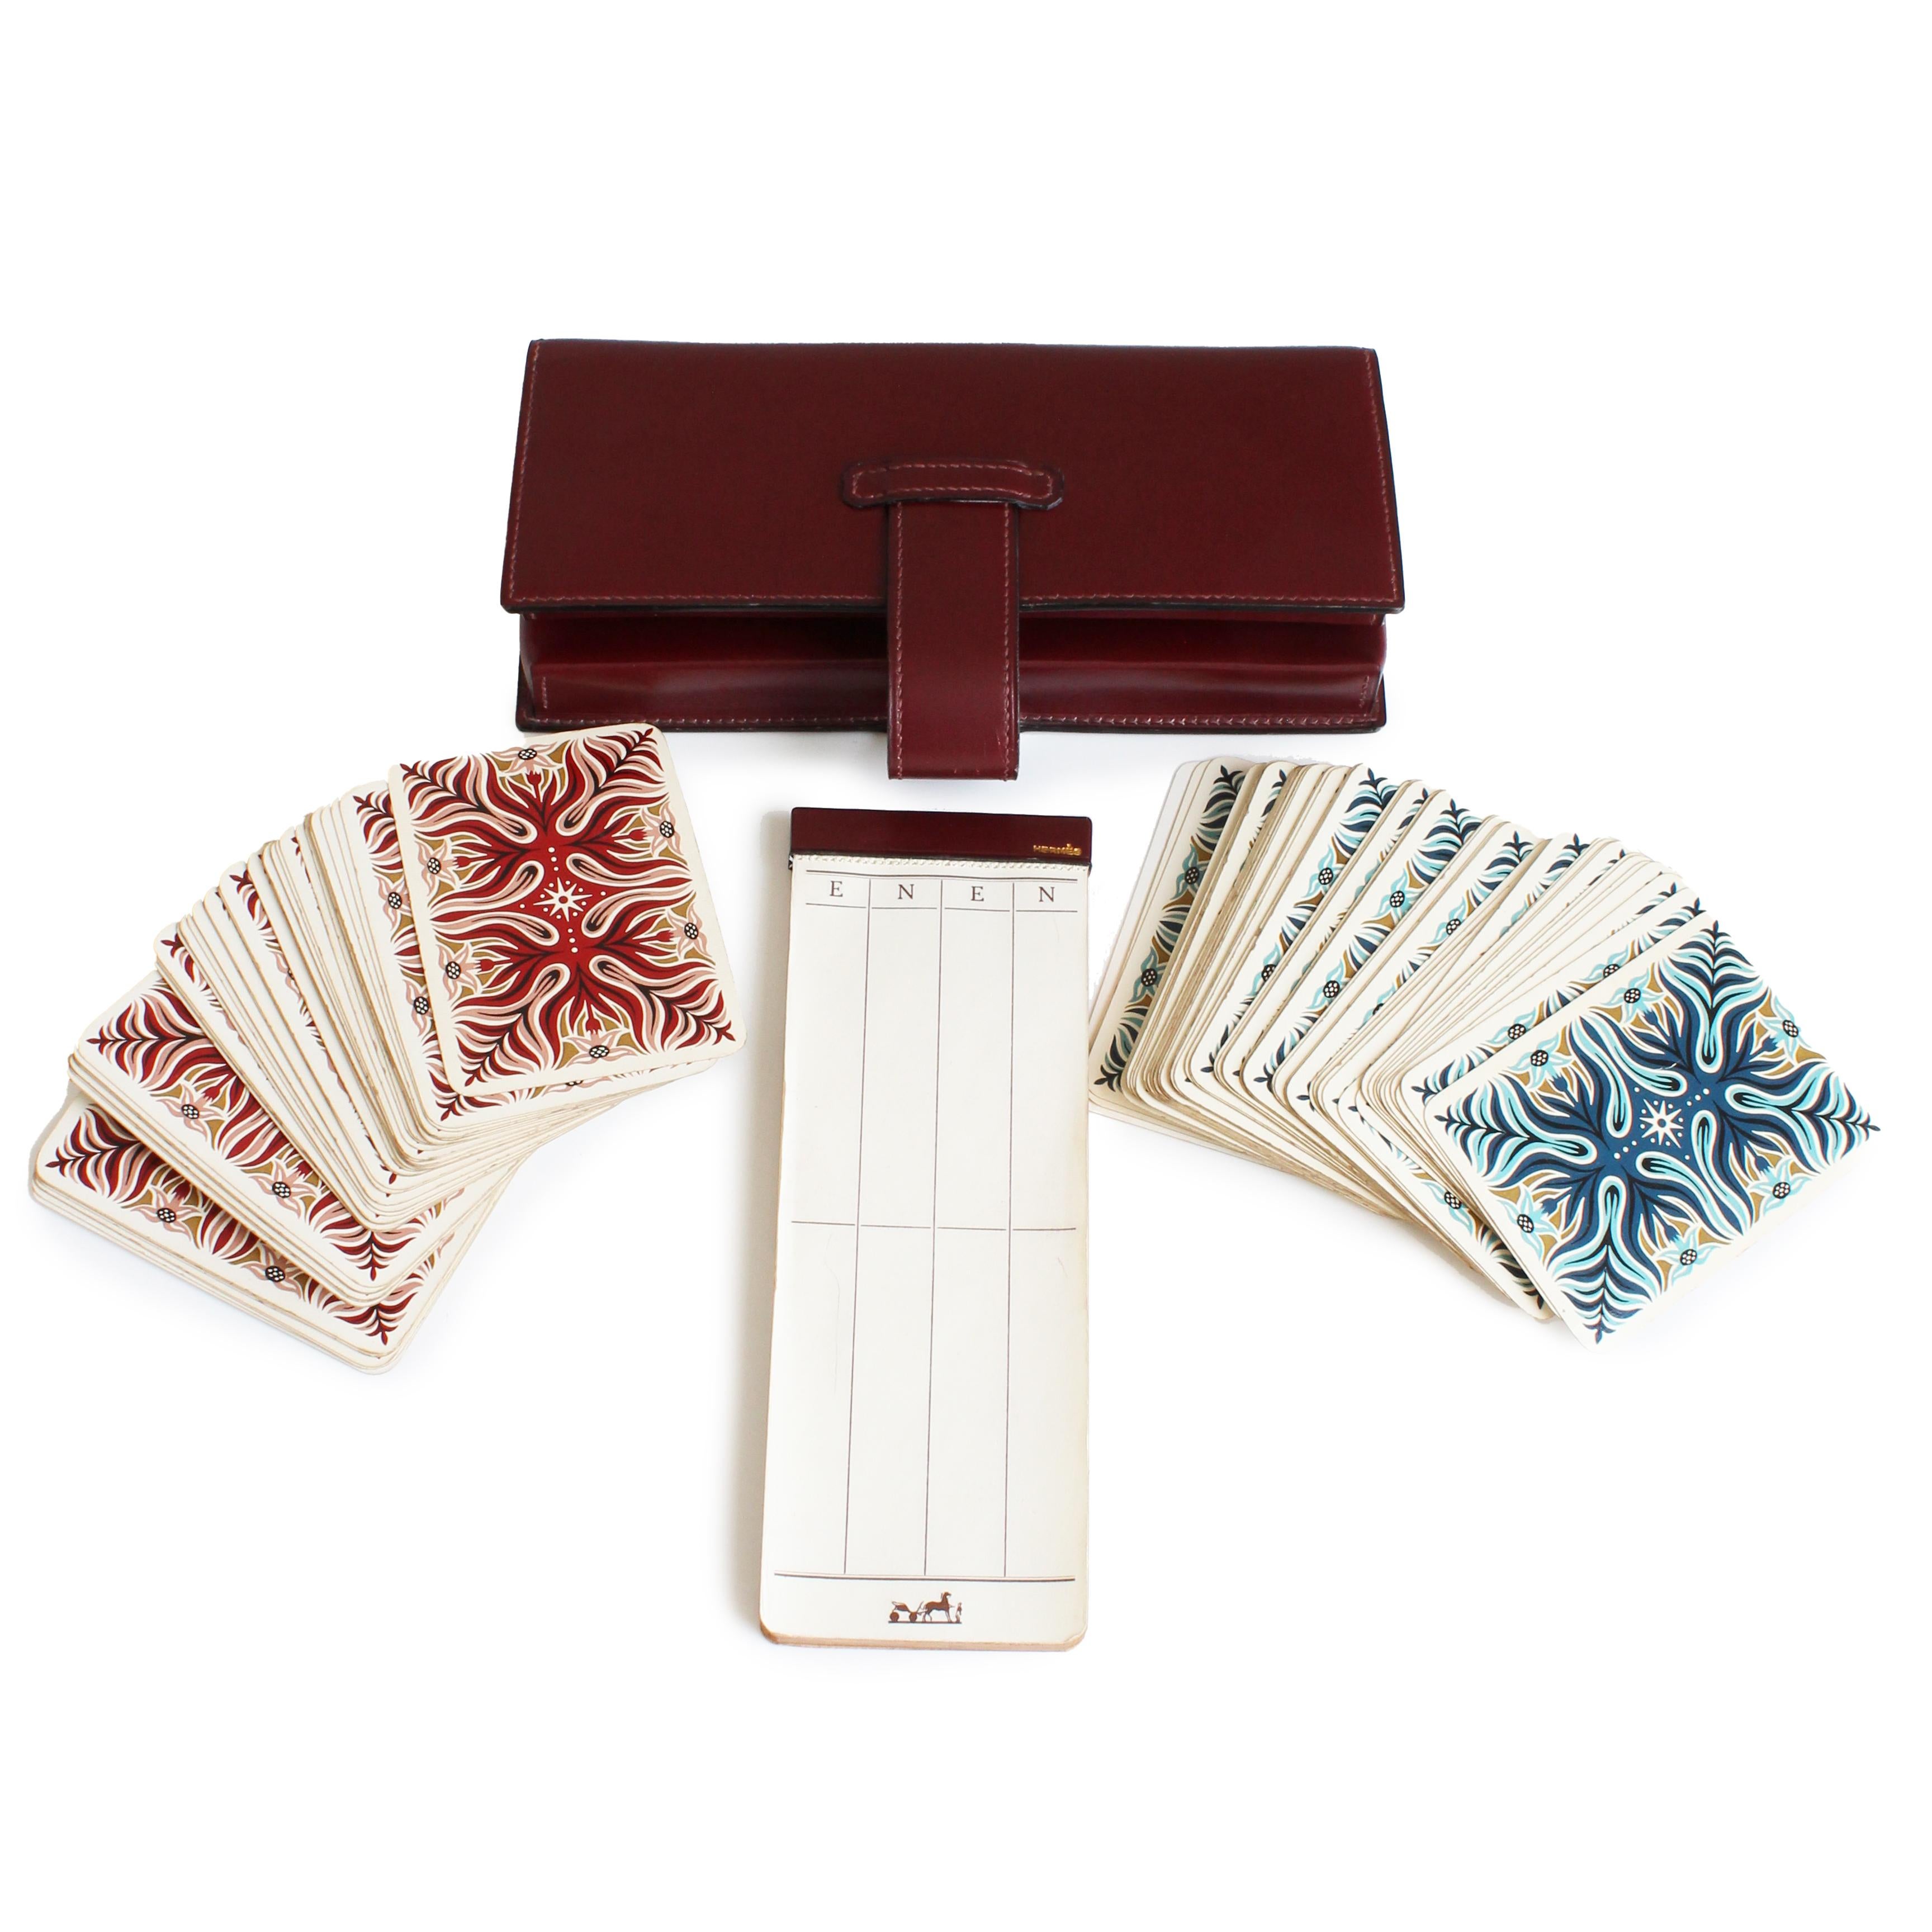 Preowned, vintage Hermes leather card game case with score card and playing cards designed by AM Cassandre, likely made in the late 70s, early 80s.  Made from a burgundy-hued box leather, it fastens with a leather tab and opens to reveal a two-set